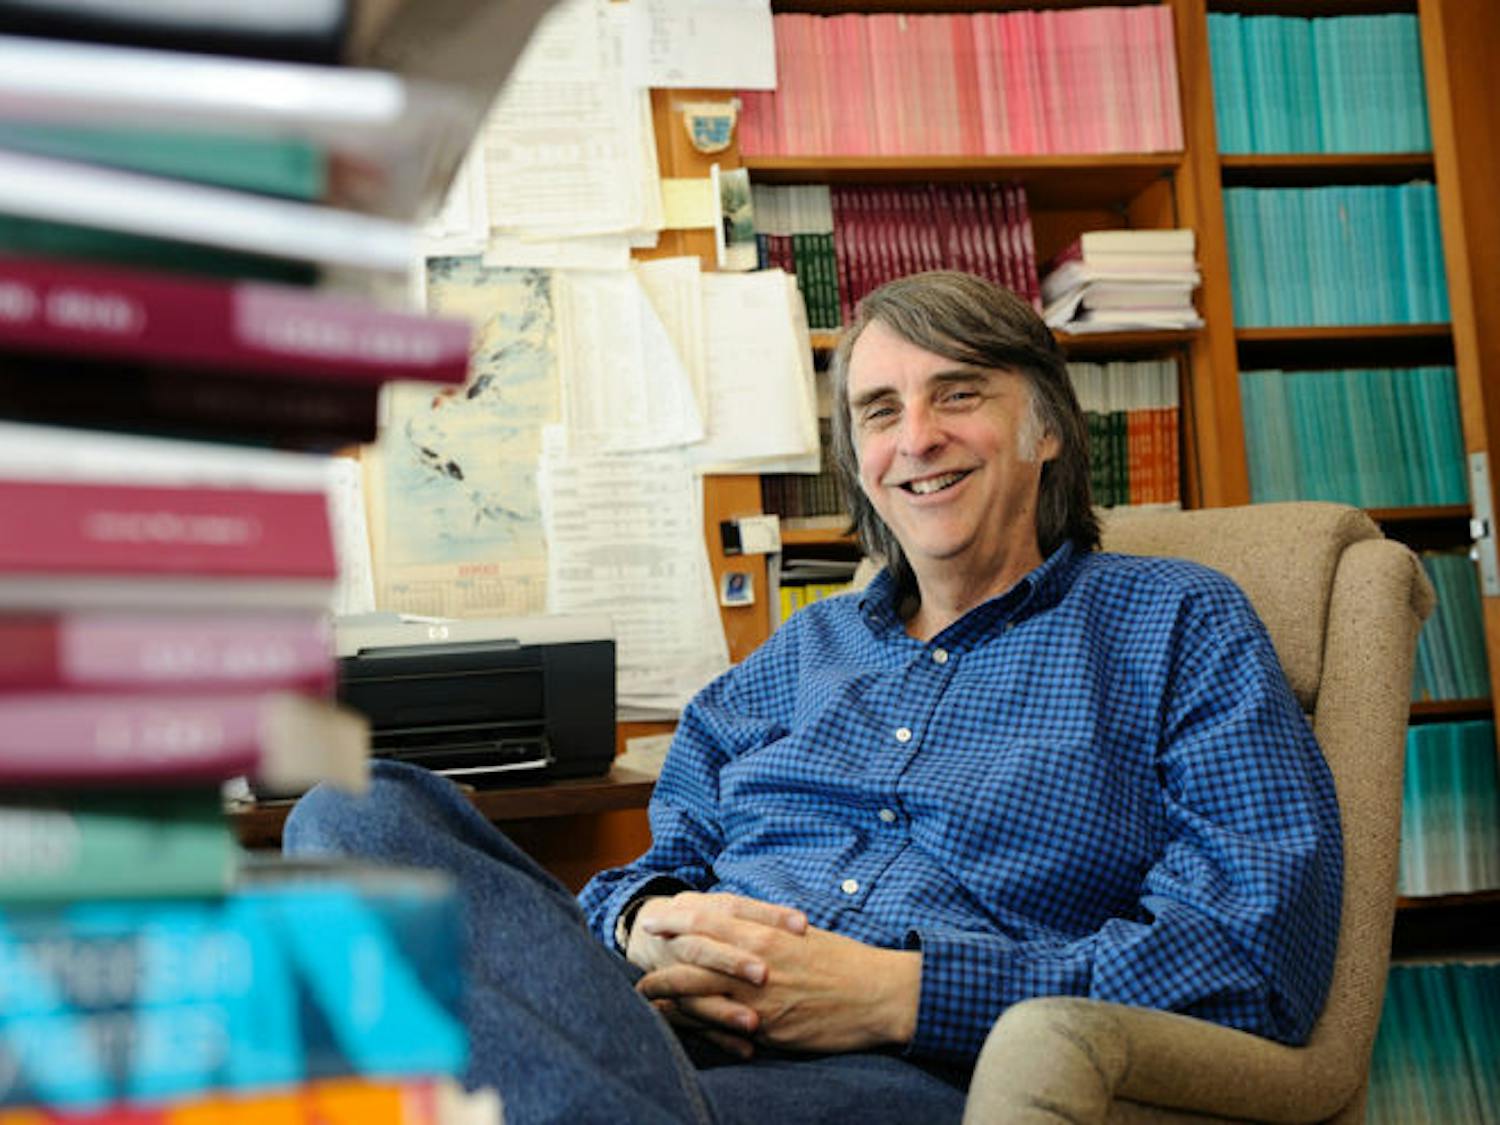 UF economics professor Mark Rush poses in his office in Matherly Hall.